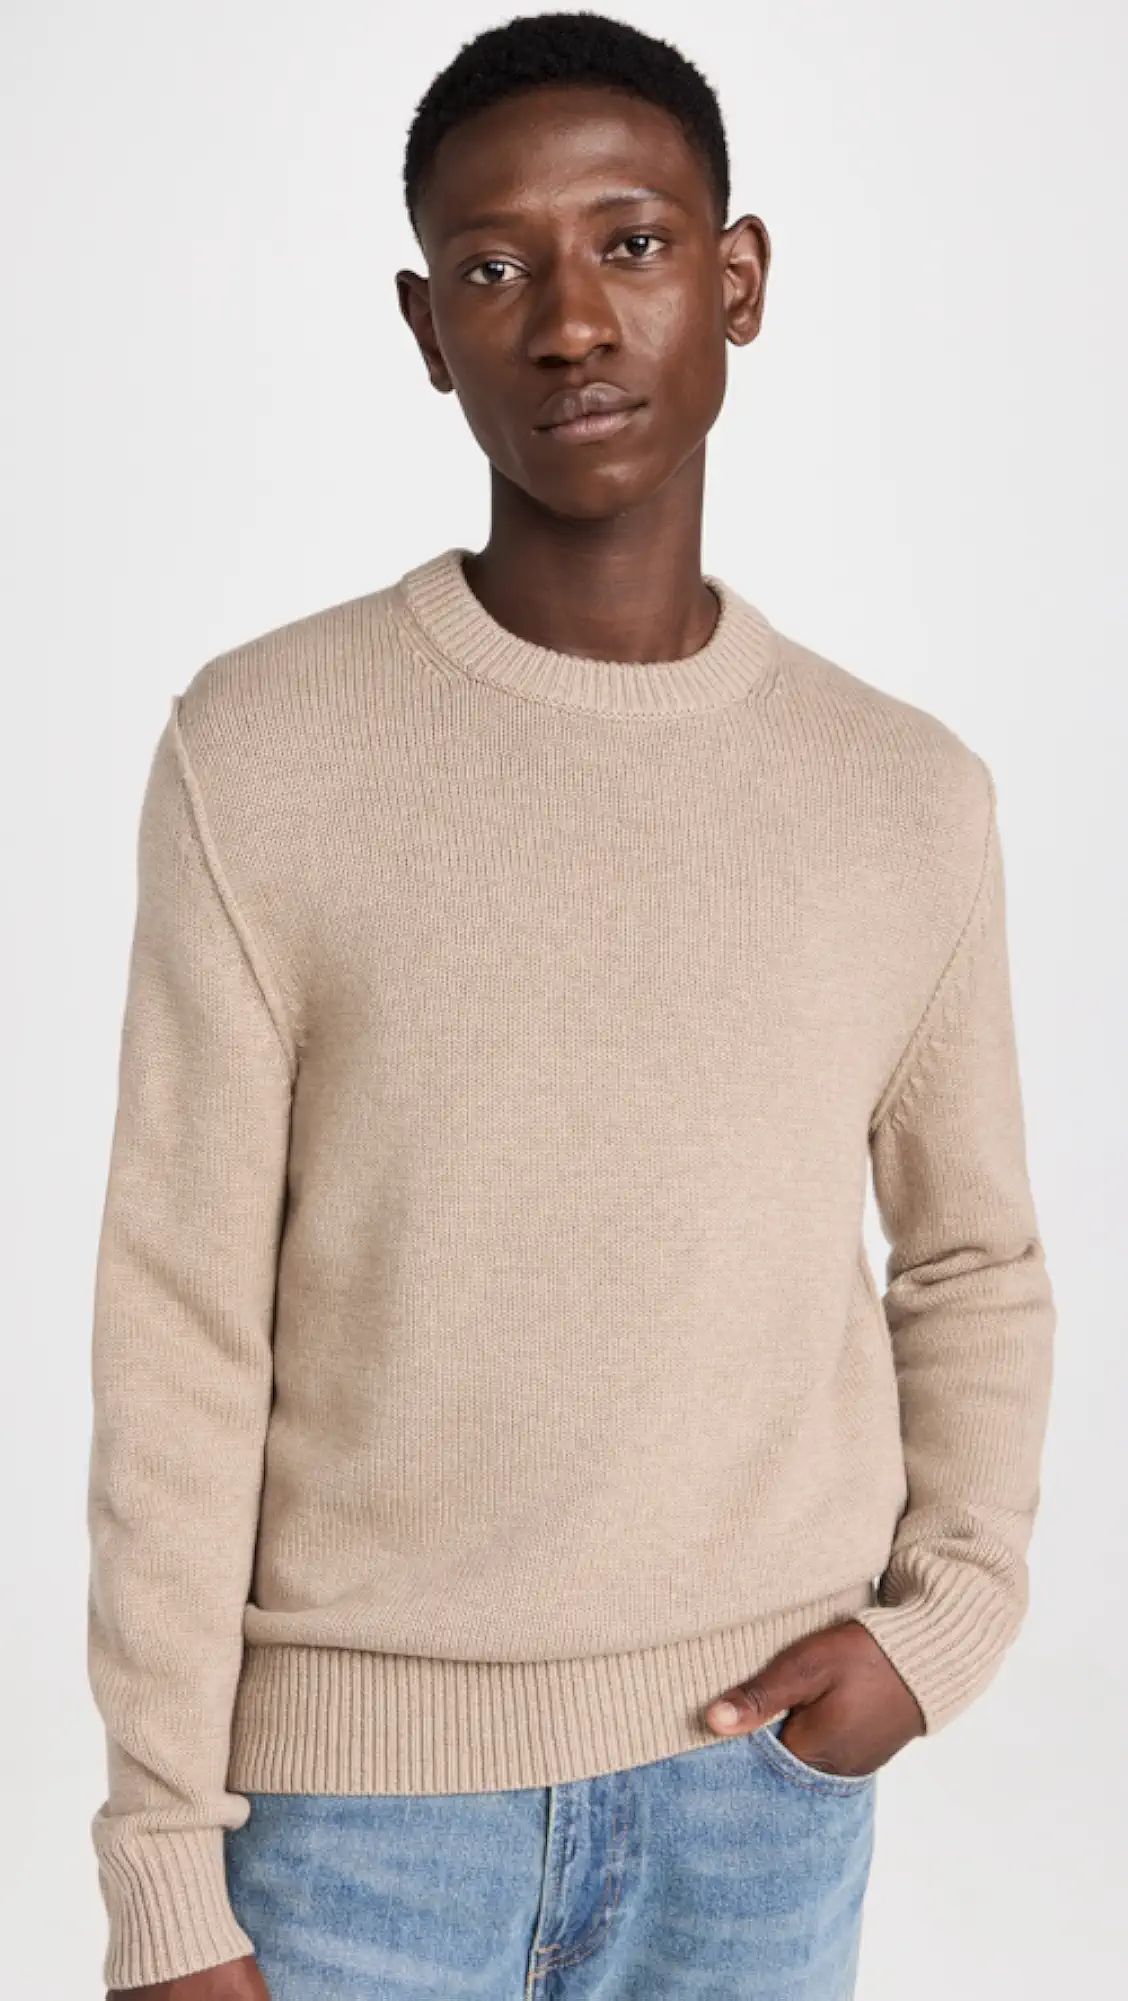 Weston Pullover Sweater in Wool Cotton | Shopbop